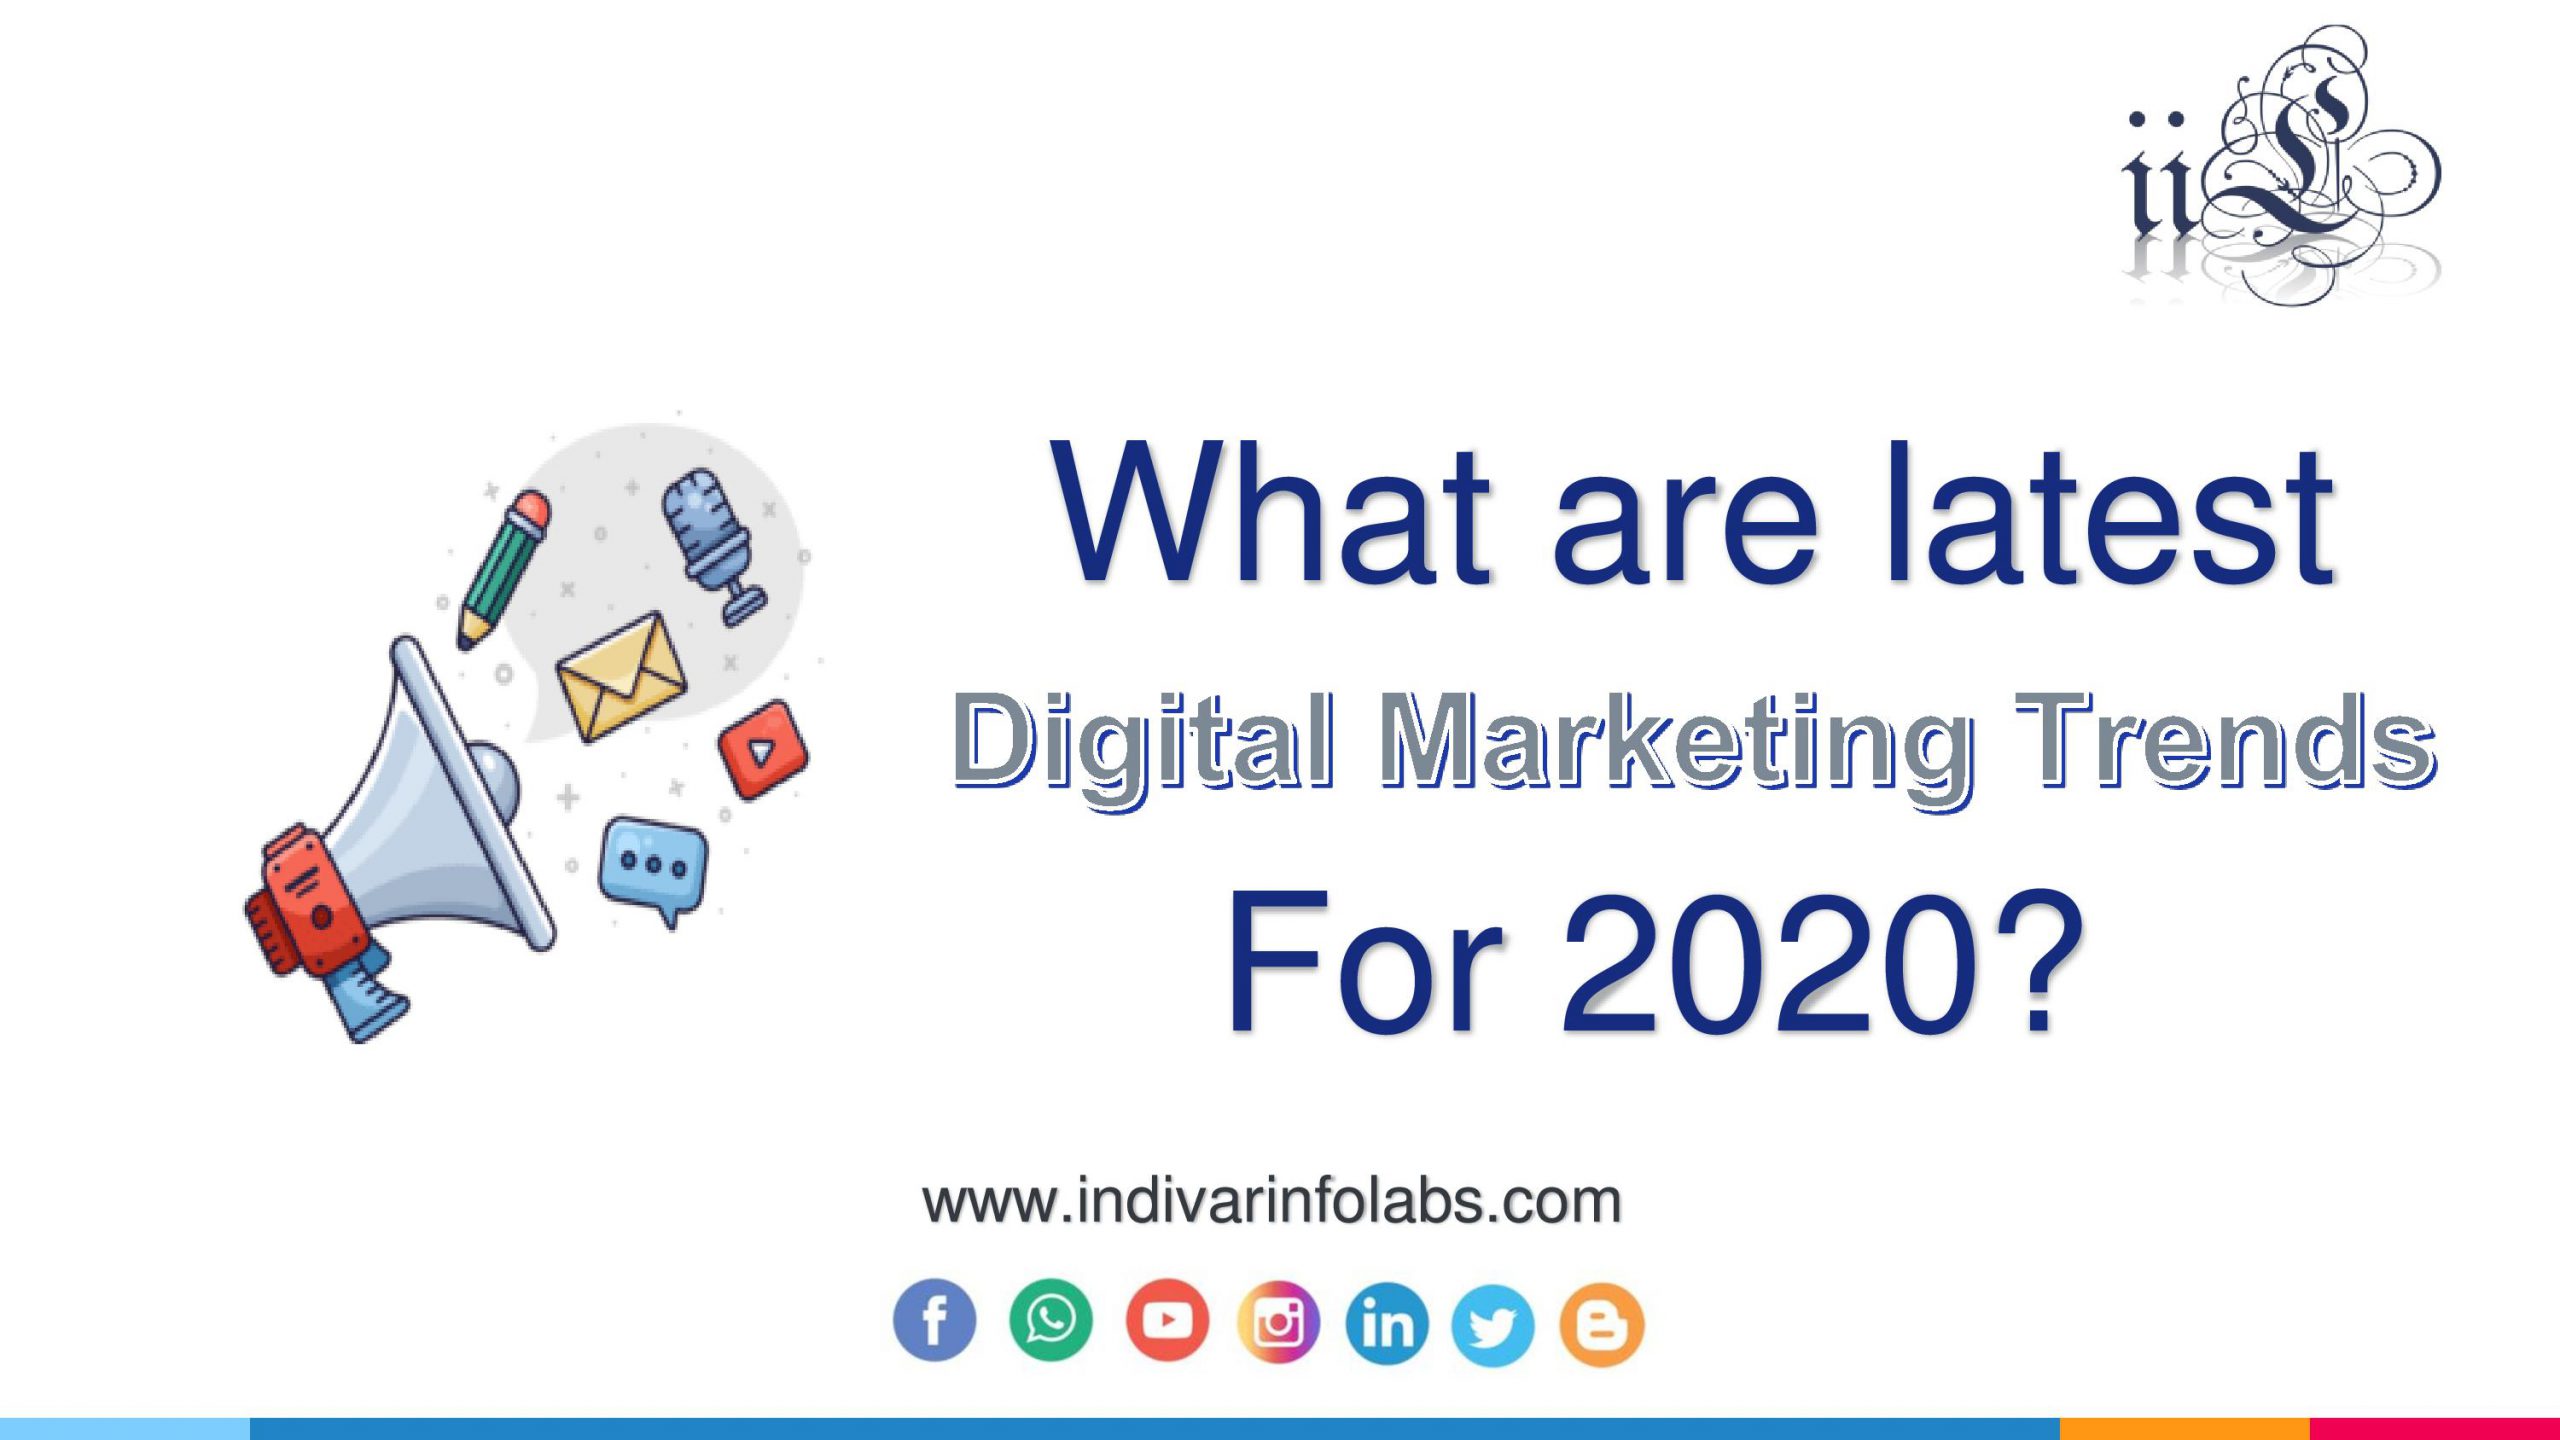 What are latest Digital Marketing Trends For 2020?